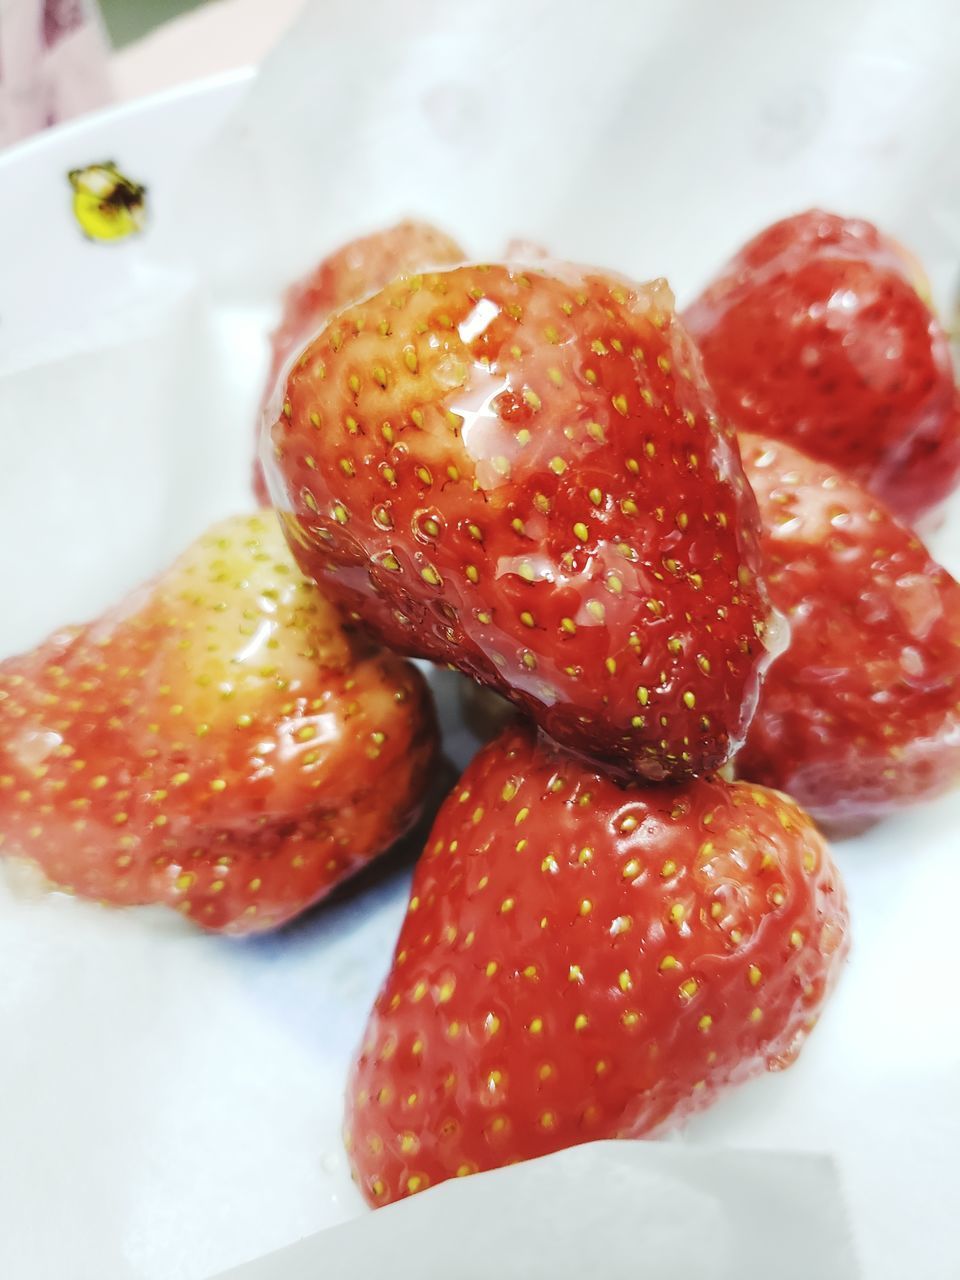 CLOSE-UP OF STRAWBERRIES IN PLATE